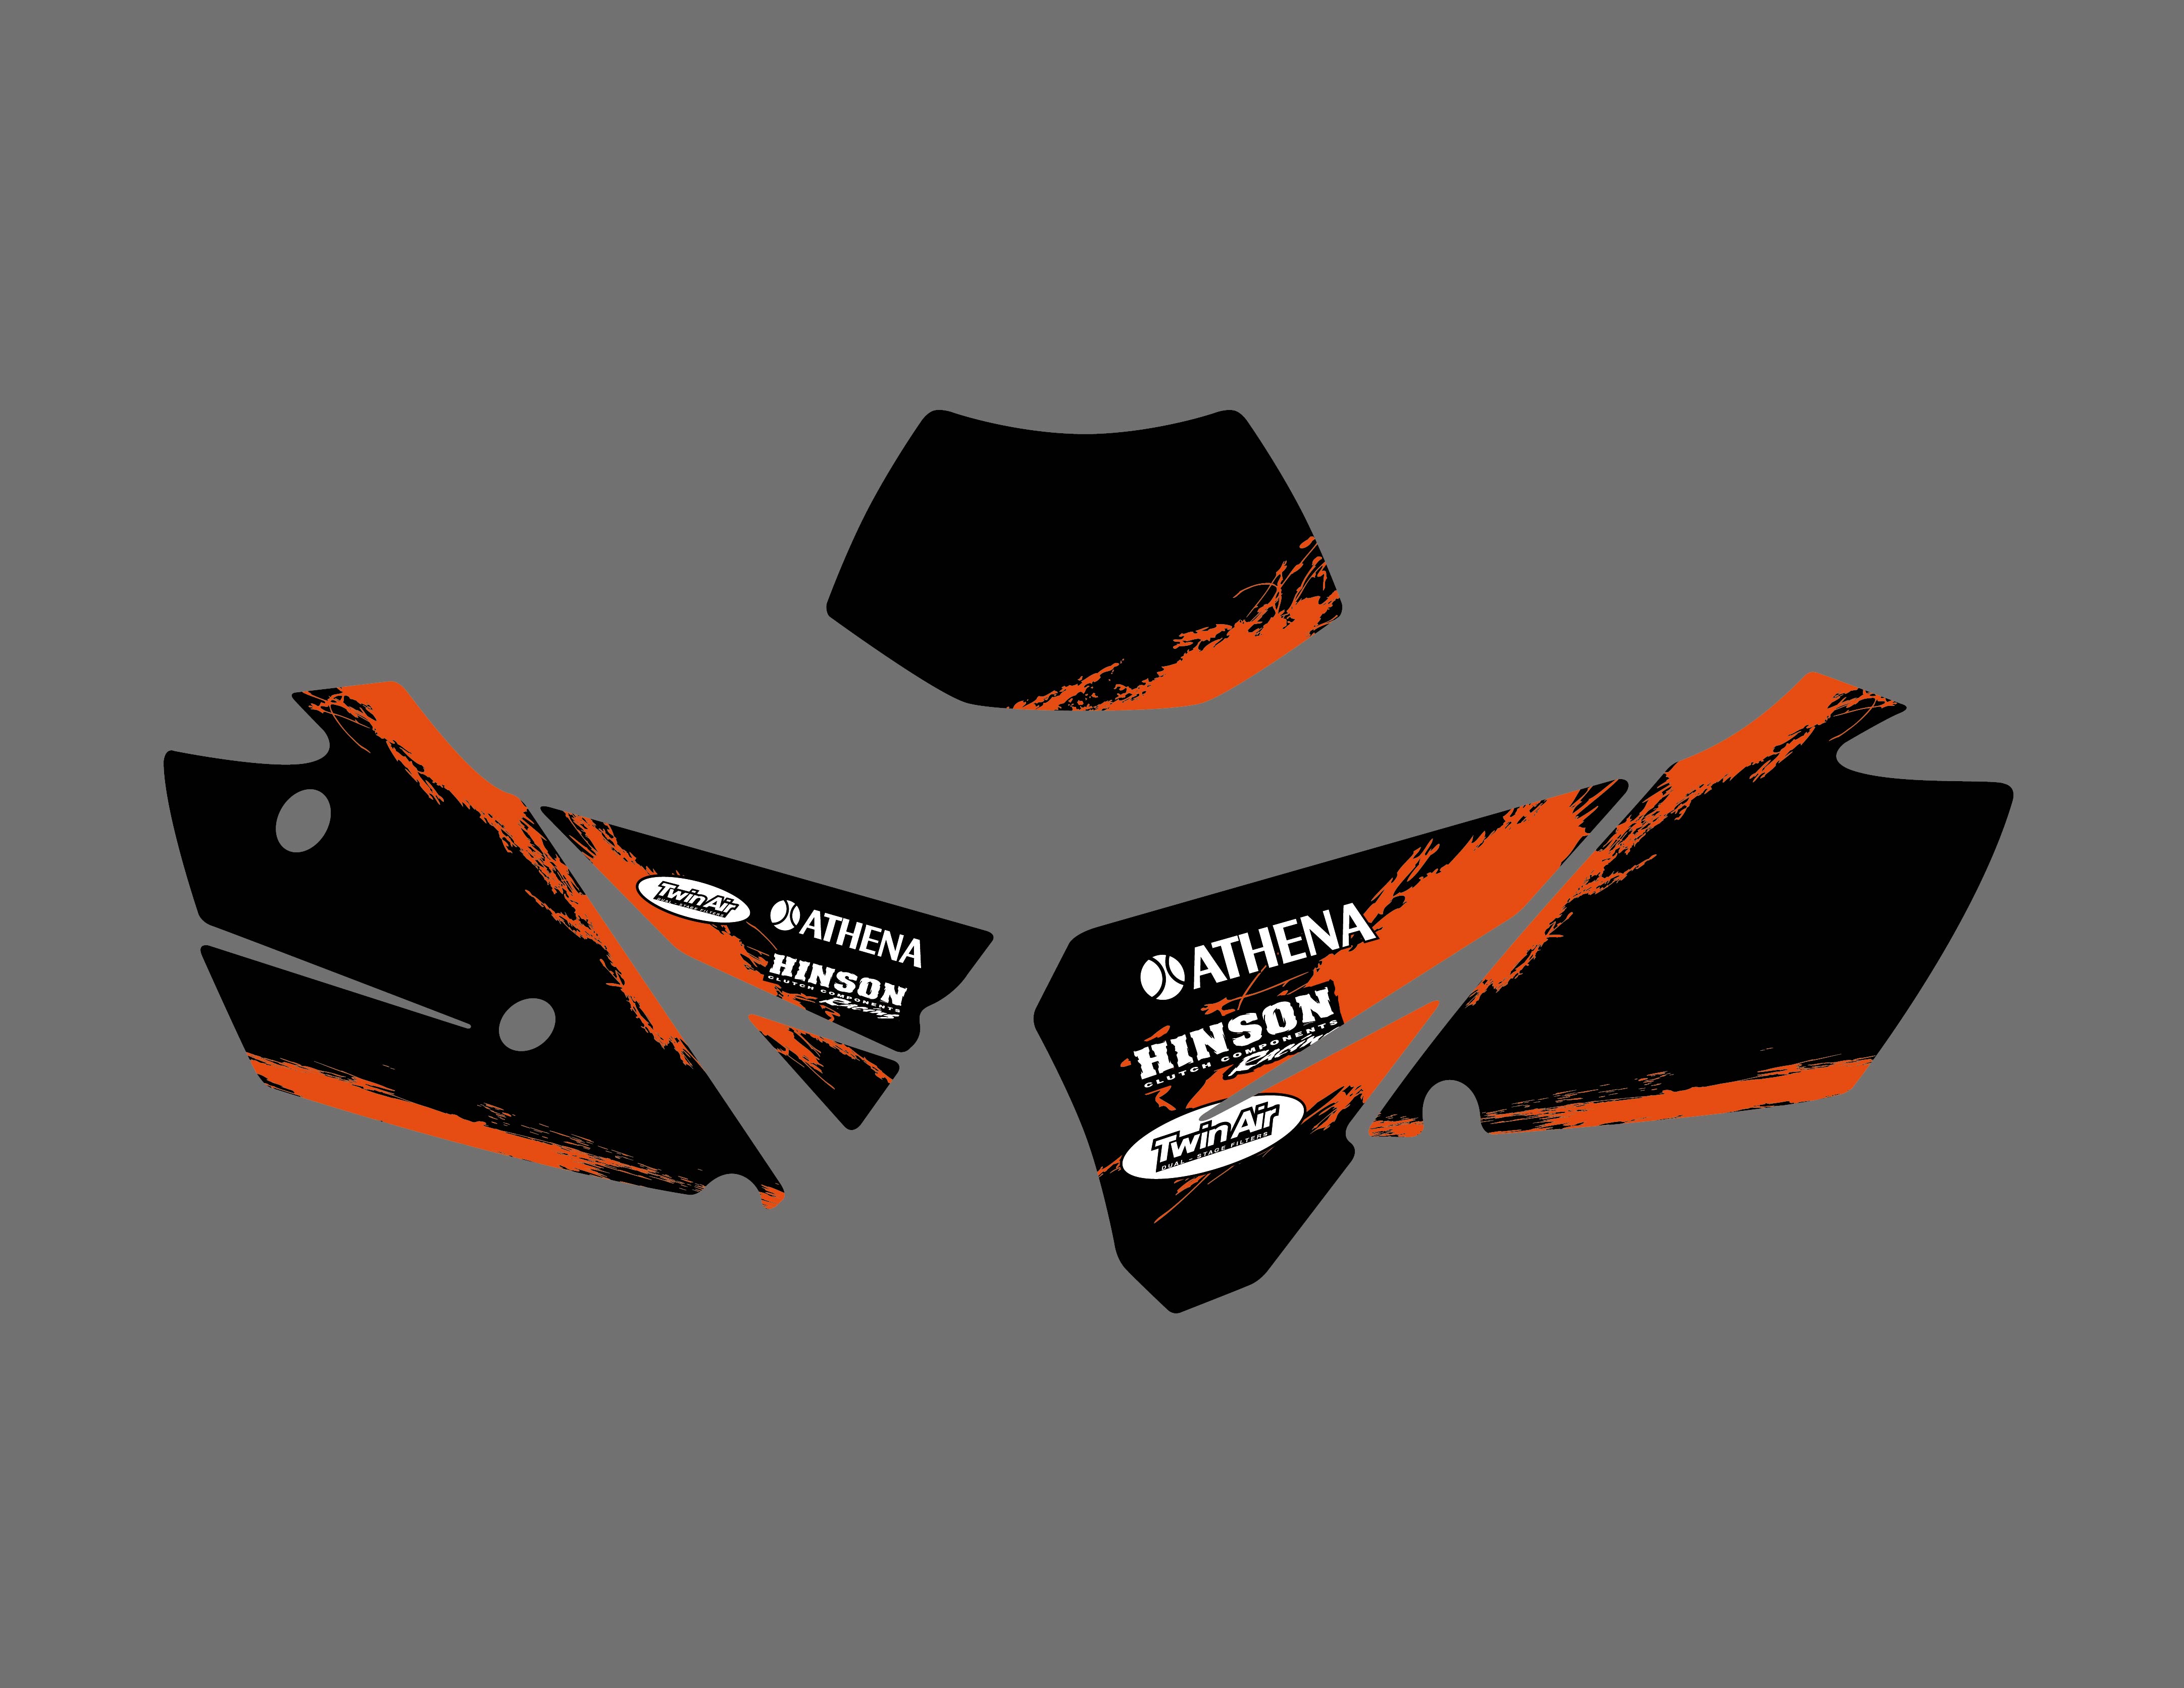 Team Graphics Backgrounds Decals For KTM EXC 125 200 250 300 400 450 525 2003 S